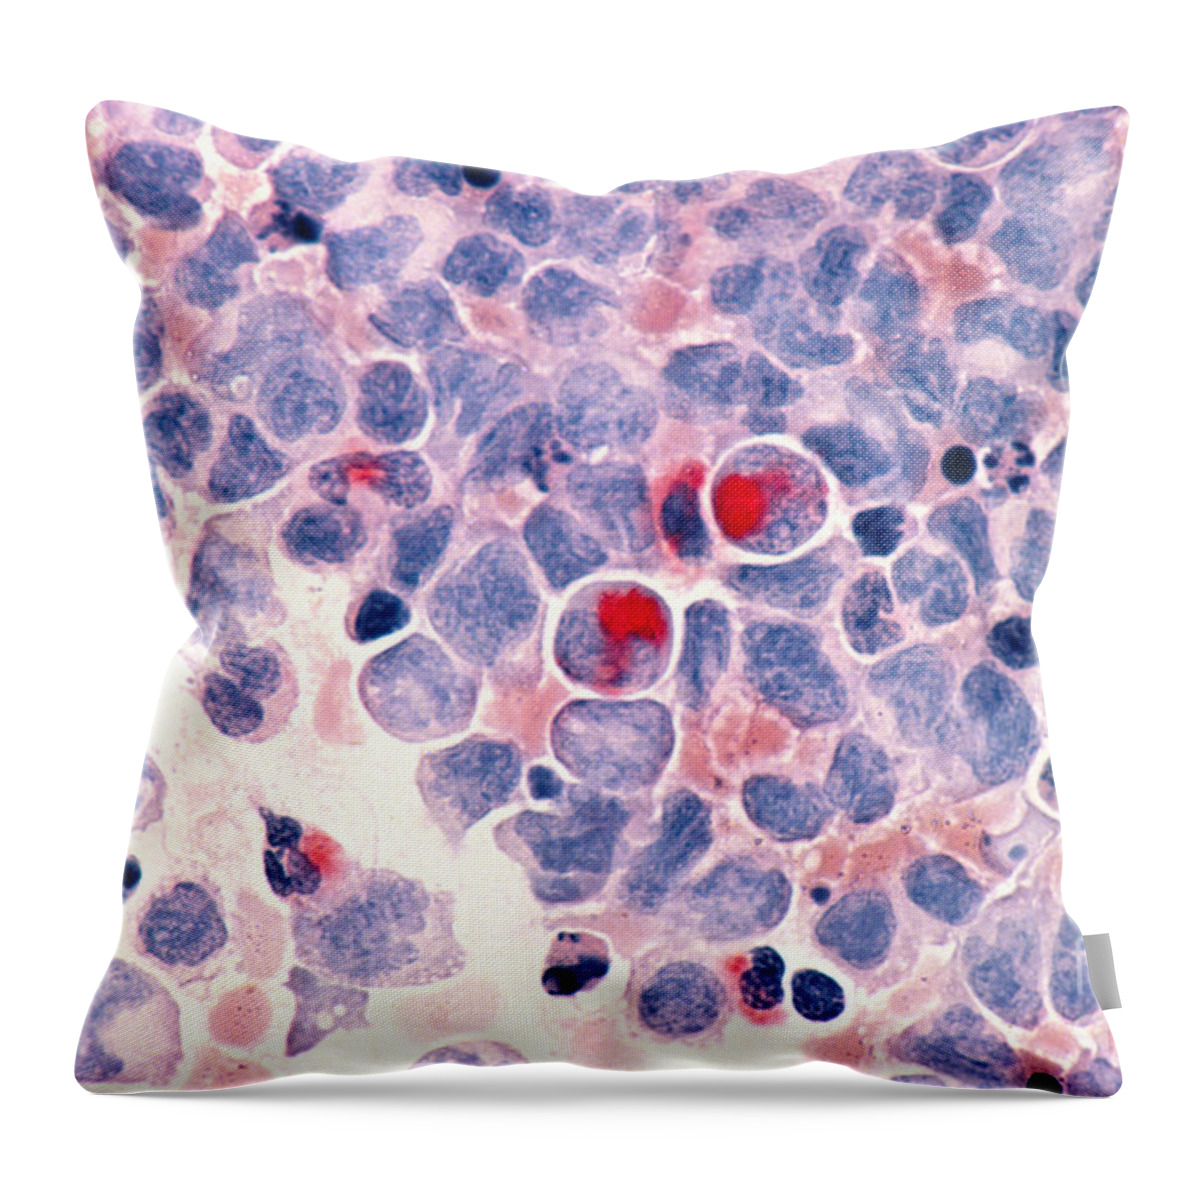 Myelocytic Leukemia Throw Pillow featuring the photograph Myelocytic Leukemia by Science Source